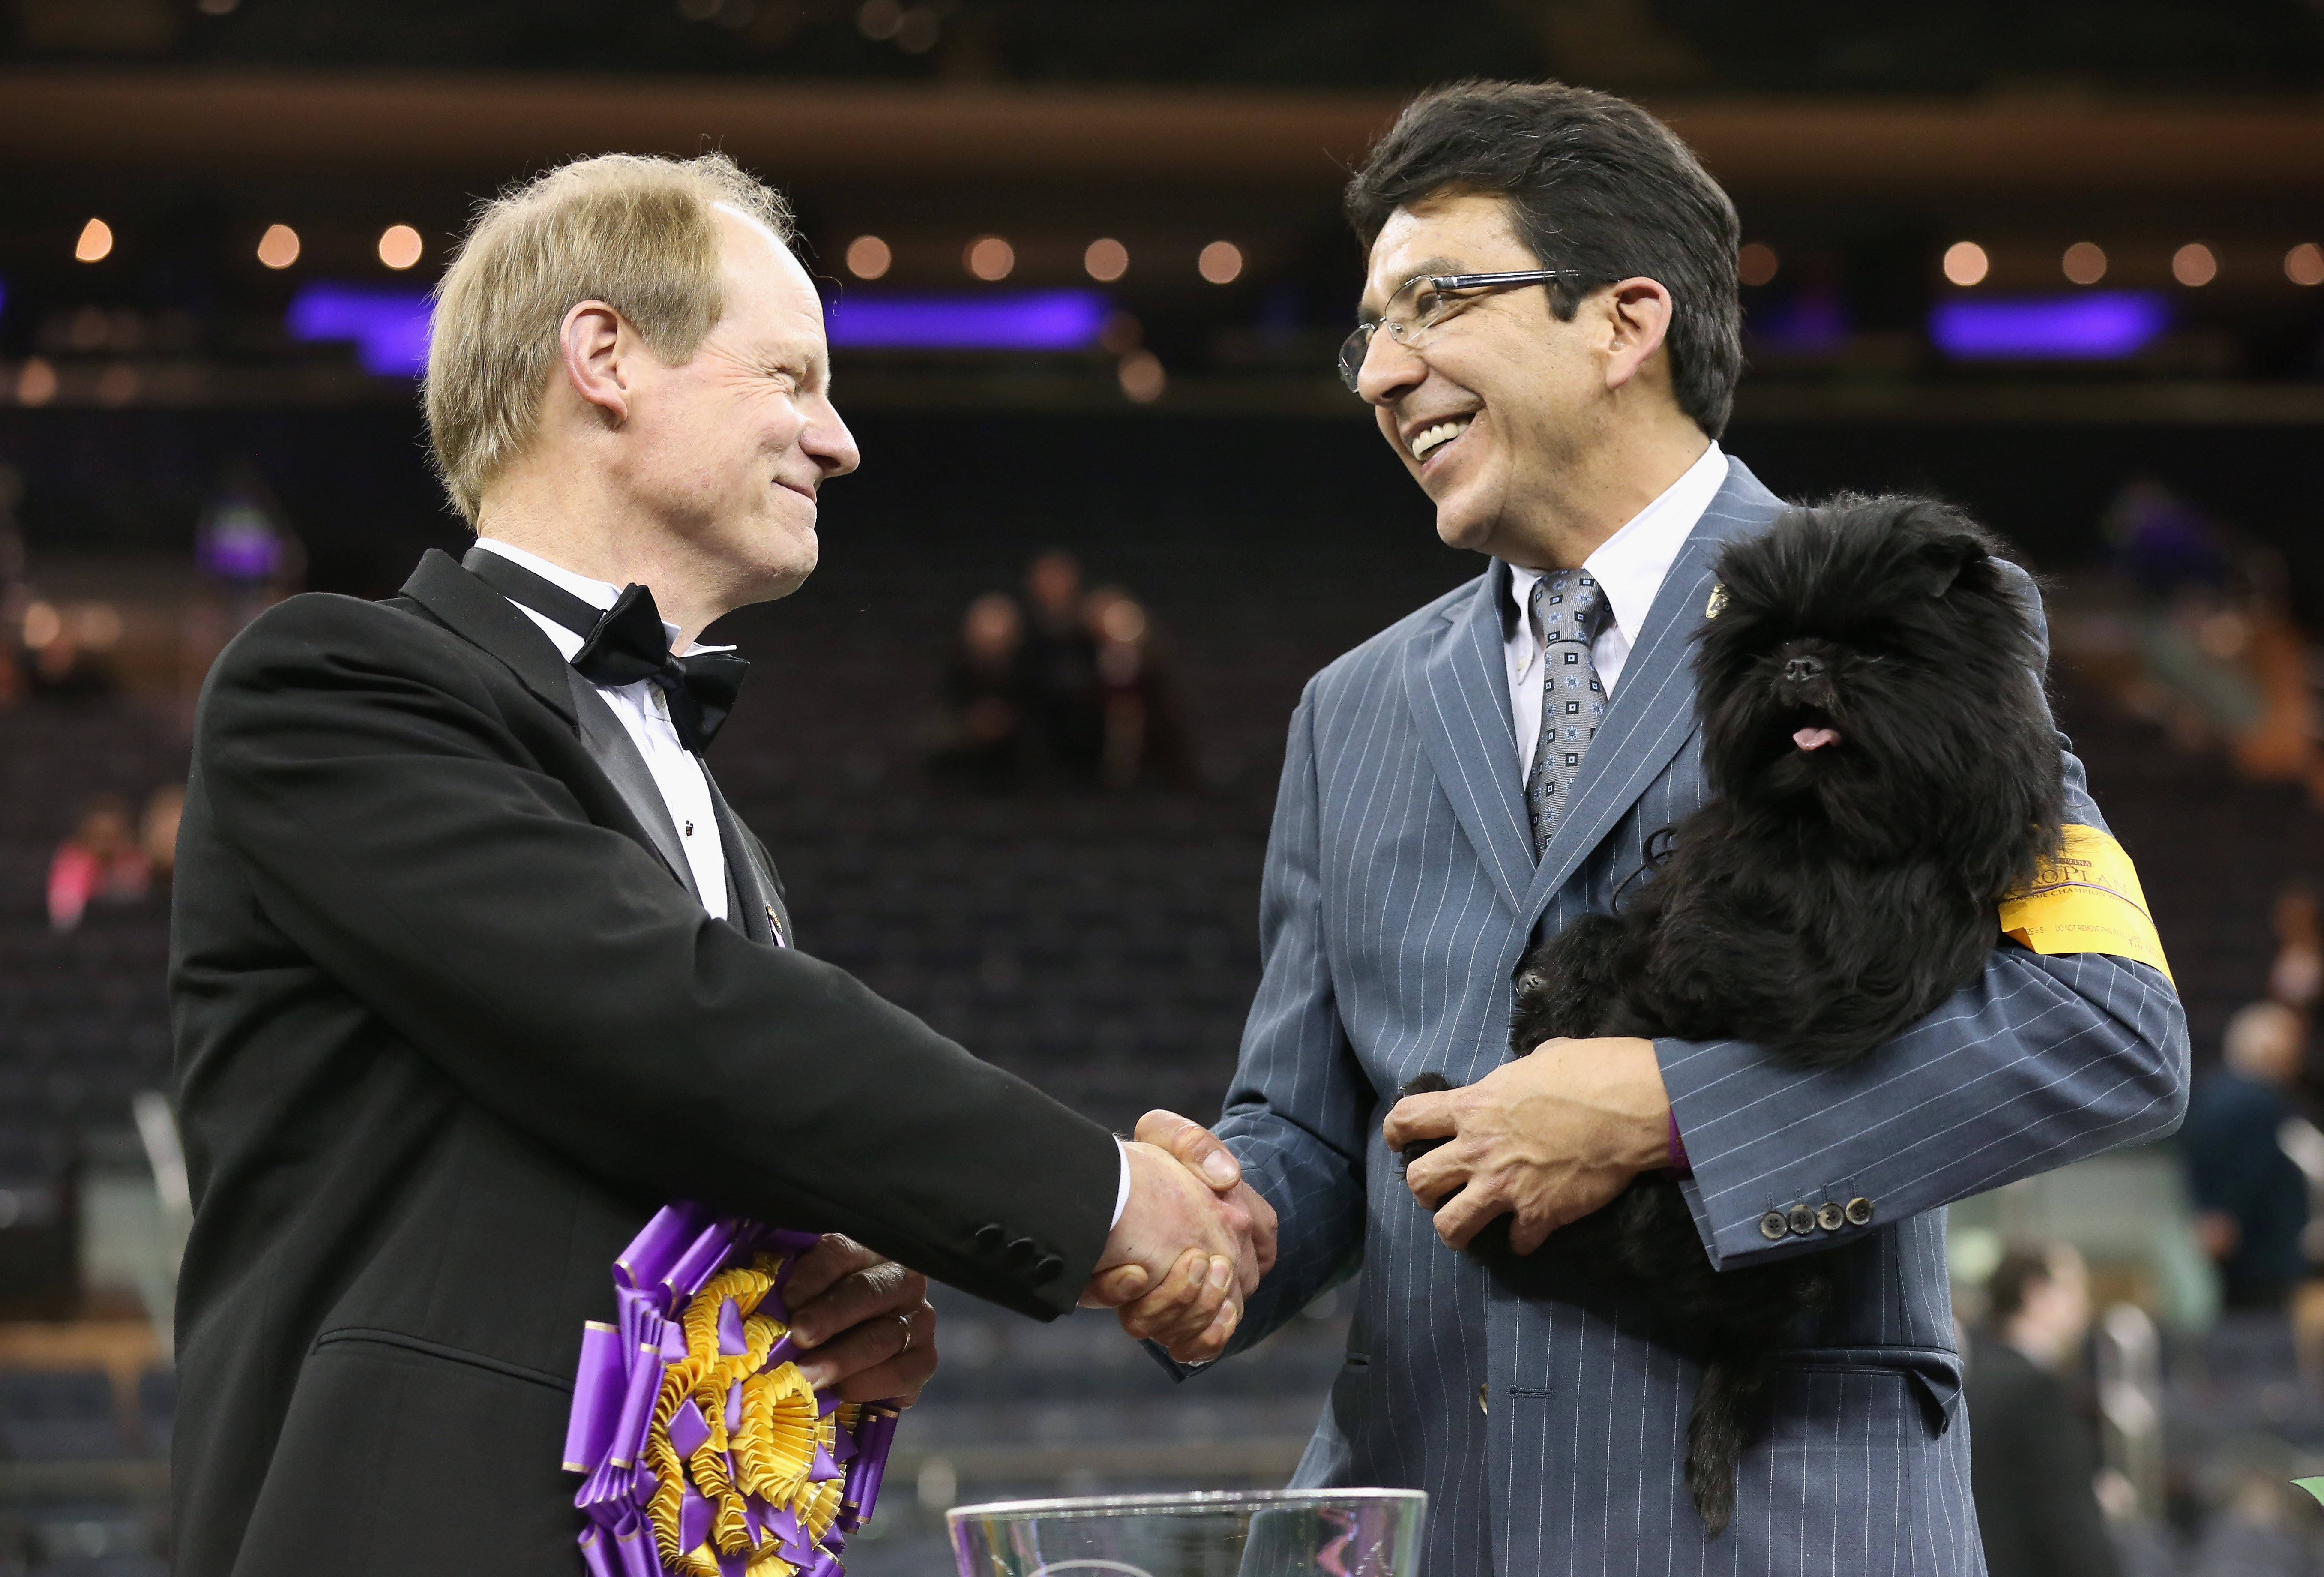 NEW YORK, NY - FEBRUARY 12: Best in Show judge Michael Dougherty (L), congratulates dog handler Ernesto Lara after his dog Banana Joe, an Affenpincher, won the 137th Westminster Kennel Club Dog Show on February 12, 2013 in New York City. A total of 2,721 dogs from 187 breeds and varieties competed in the event, hailed by organizers as the second oldest sporting competition in America, after the Kentucky Derby. (Photo by John Moore/Getty Images) ***BESTPIX*** ORG XMIT: 159729903 ORIG FILE ID: 161608571